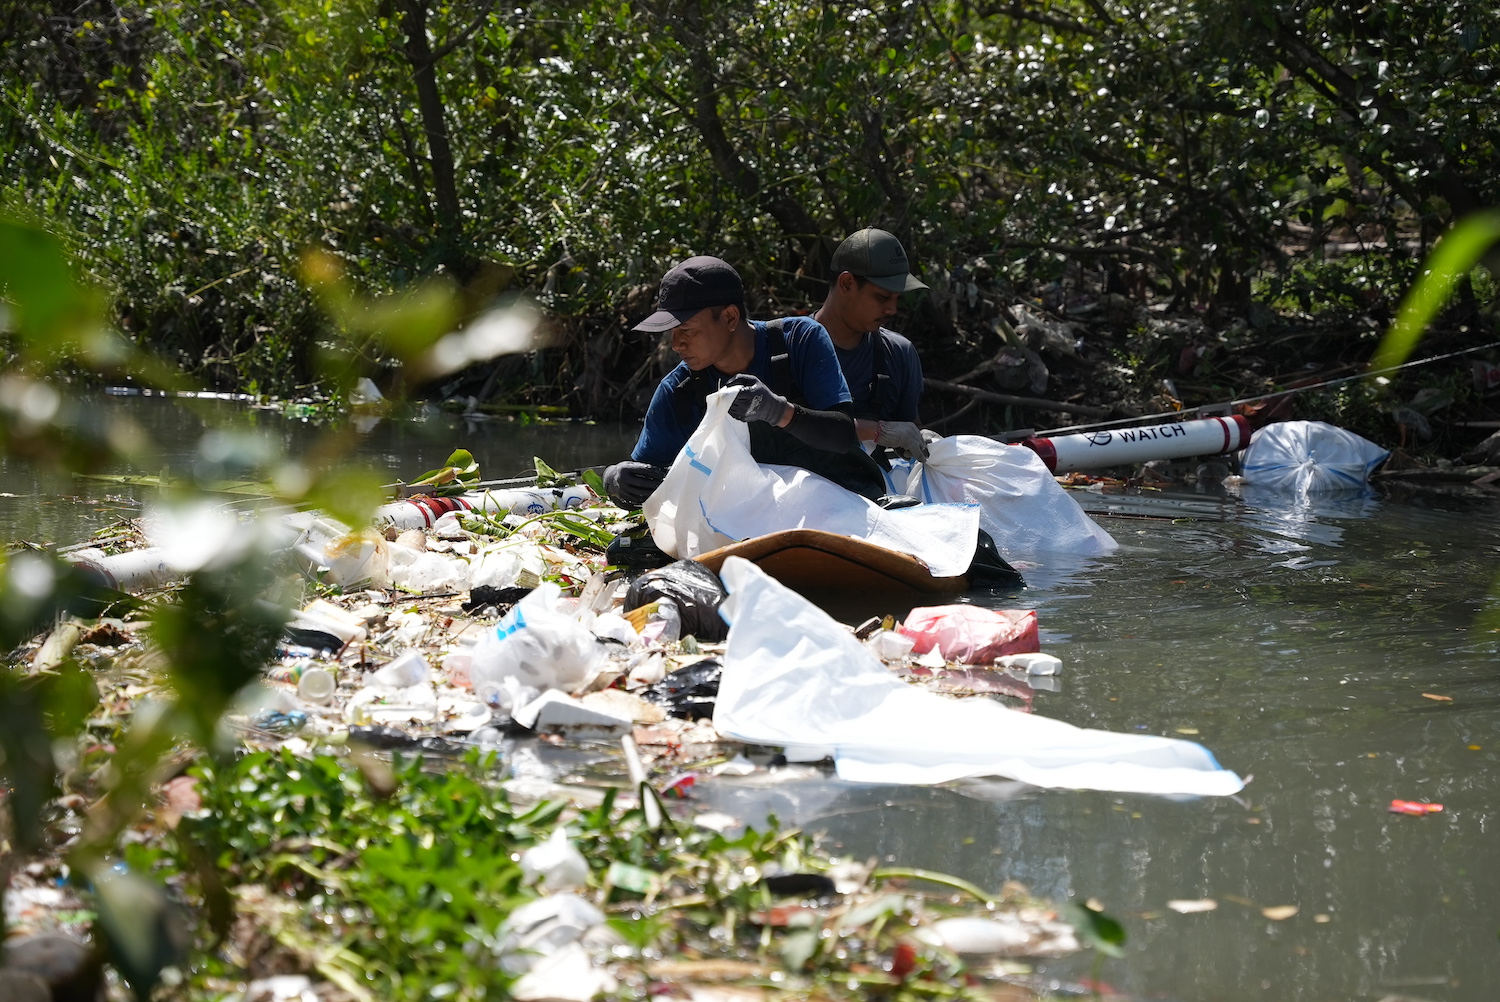 The Sungai Watch river warriors assess the mass of trash caught in one of the floating river barriers.